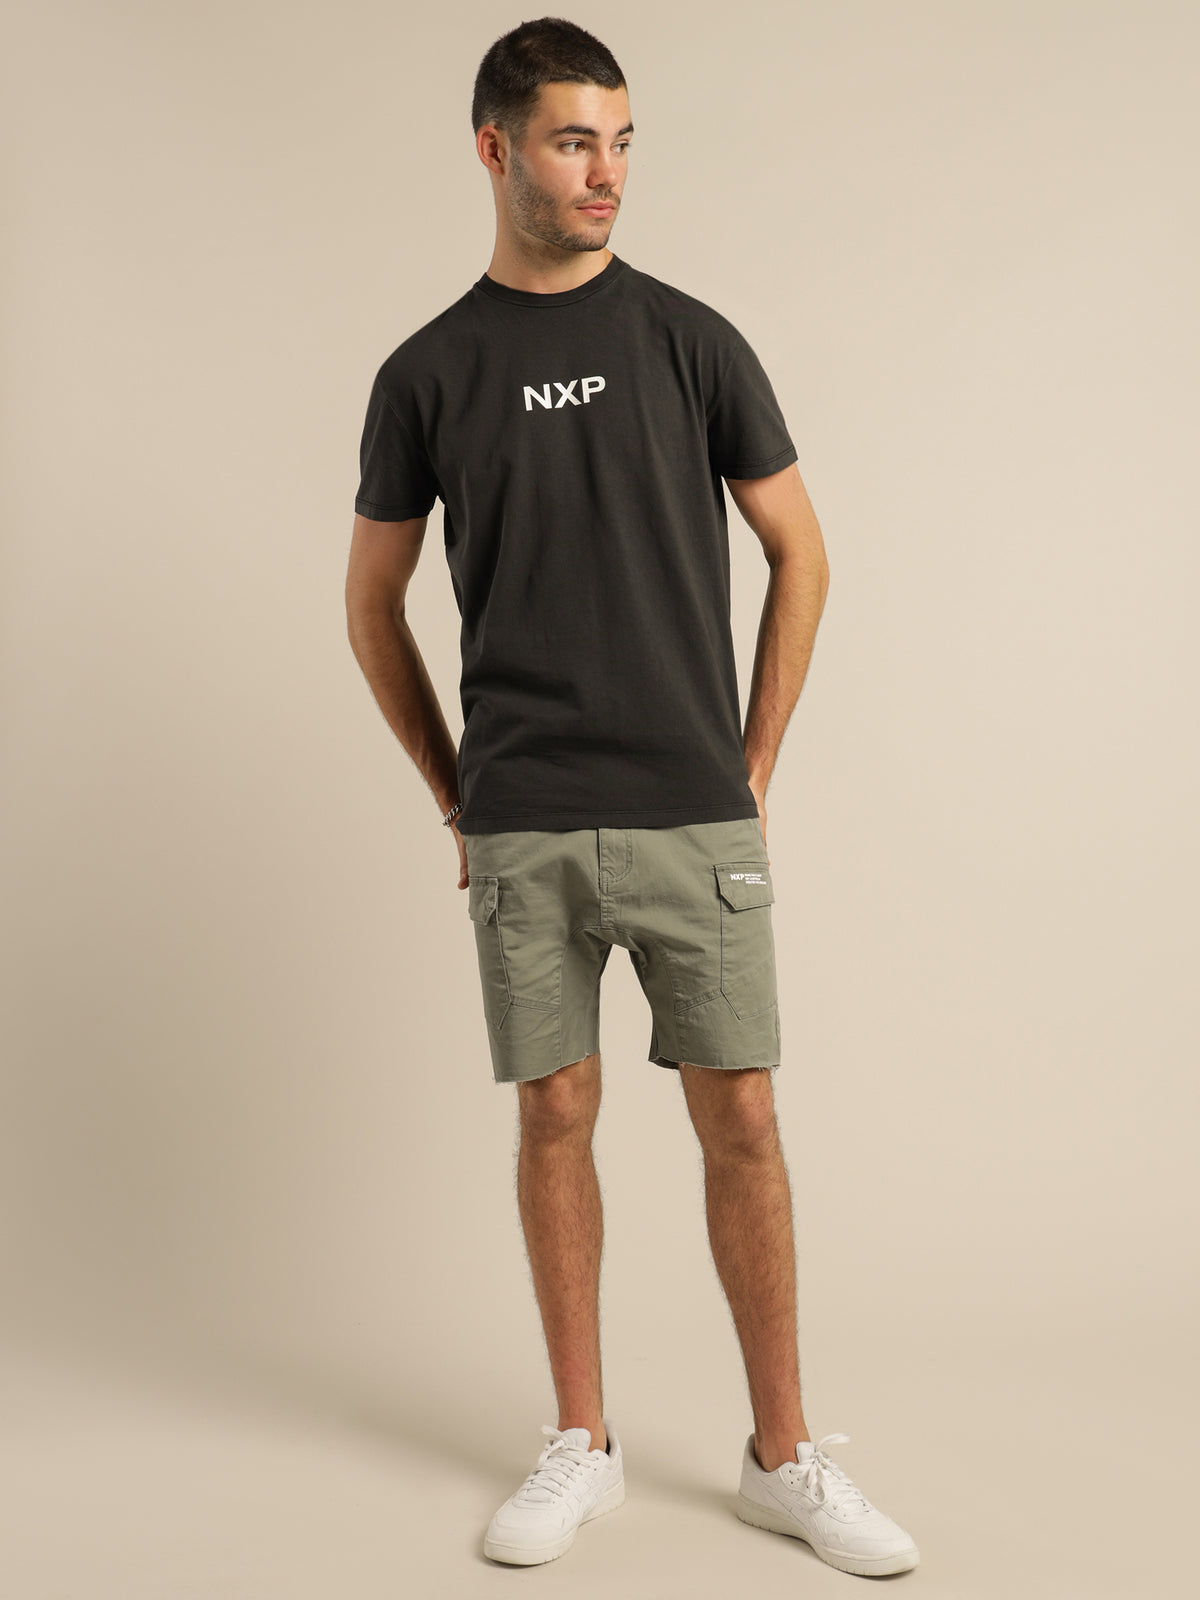 Reflection Relaxed T-Shirt in Pigment Asphalt